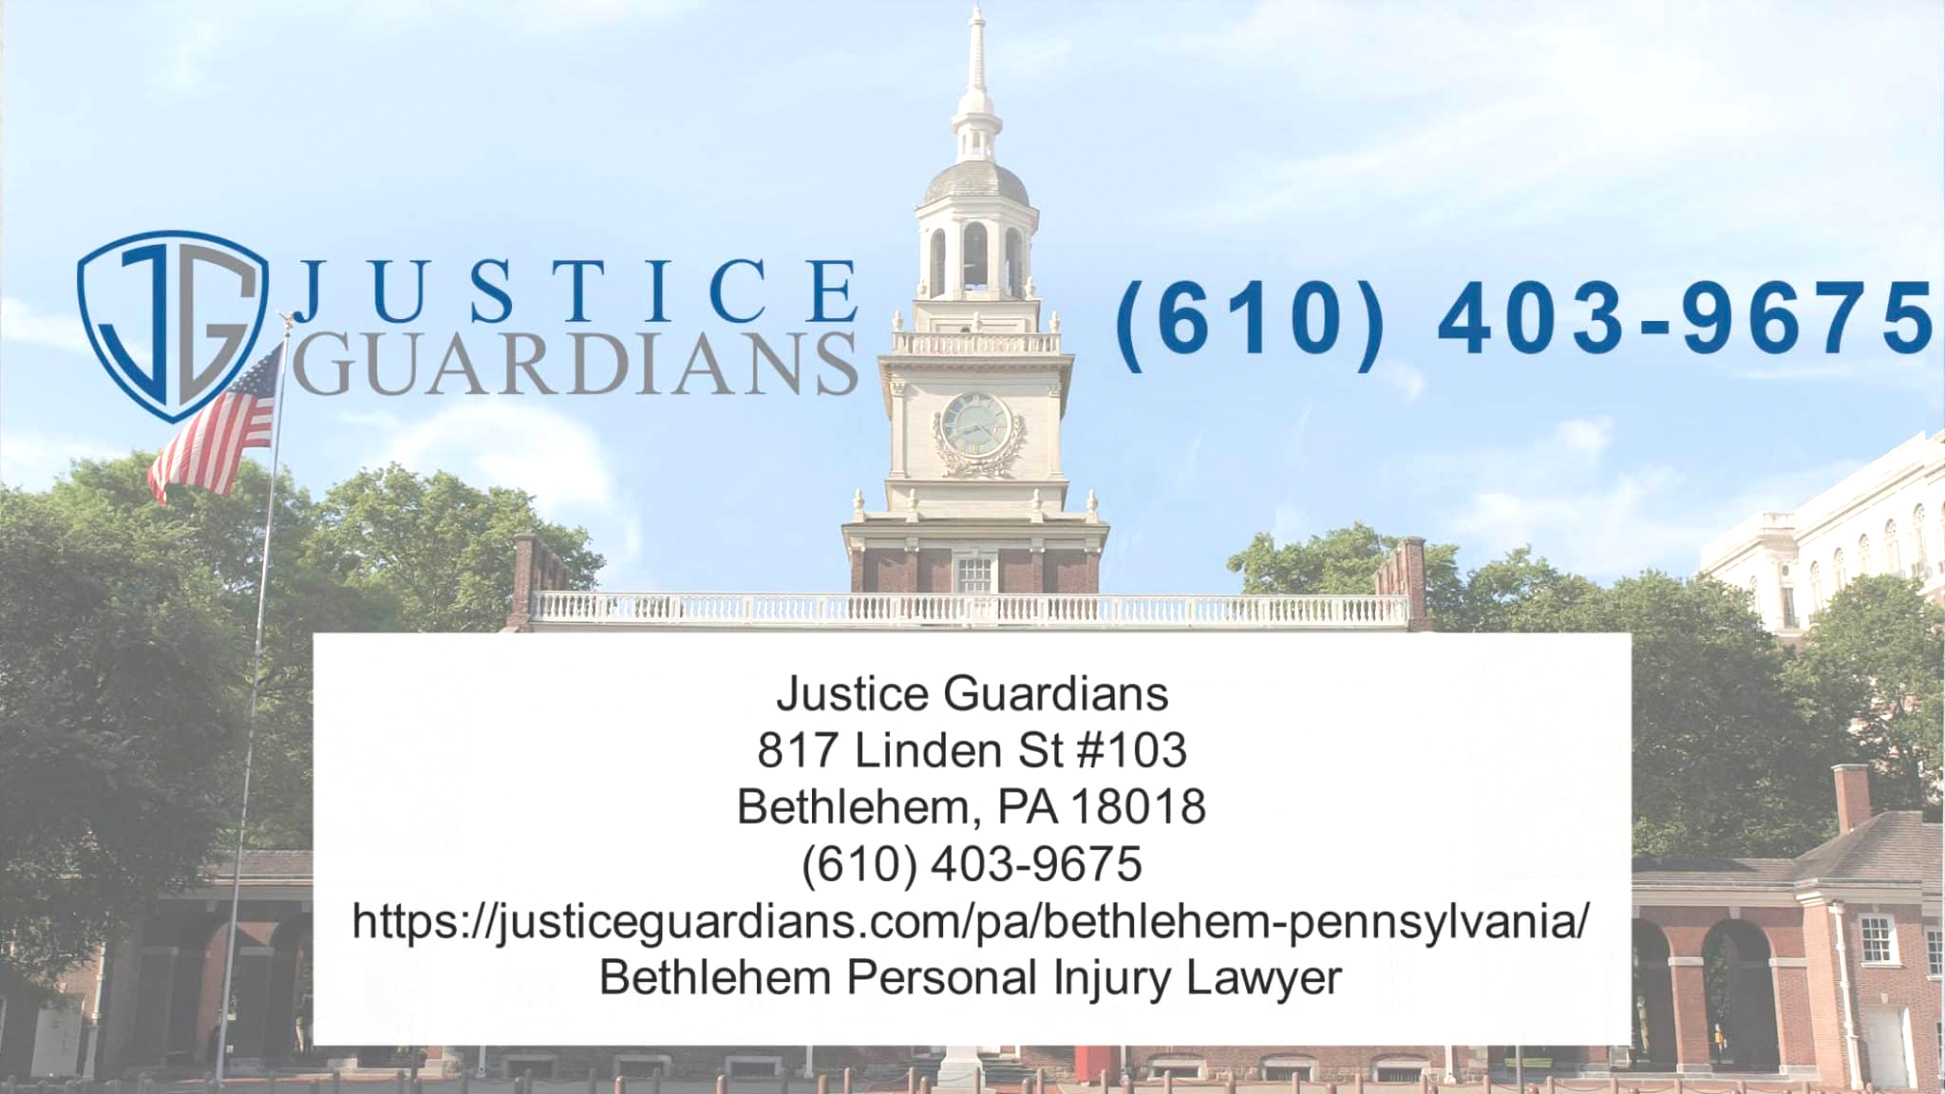 Personil Injury Lawyer In Columbia Pa Dans Bethlehem, Pa Personal Injury attorney Justice Guardians Law Firm